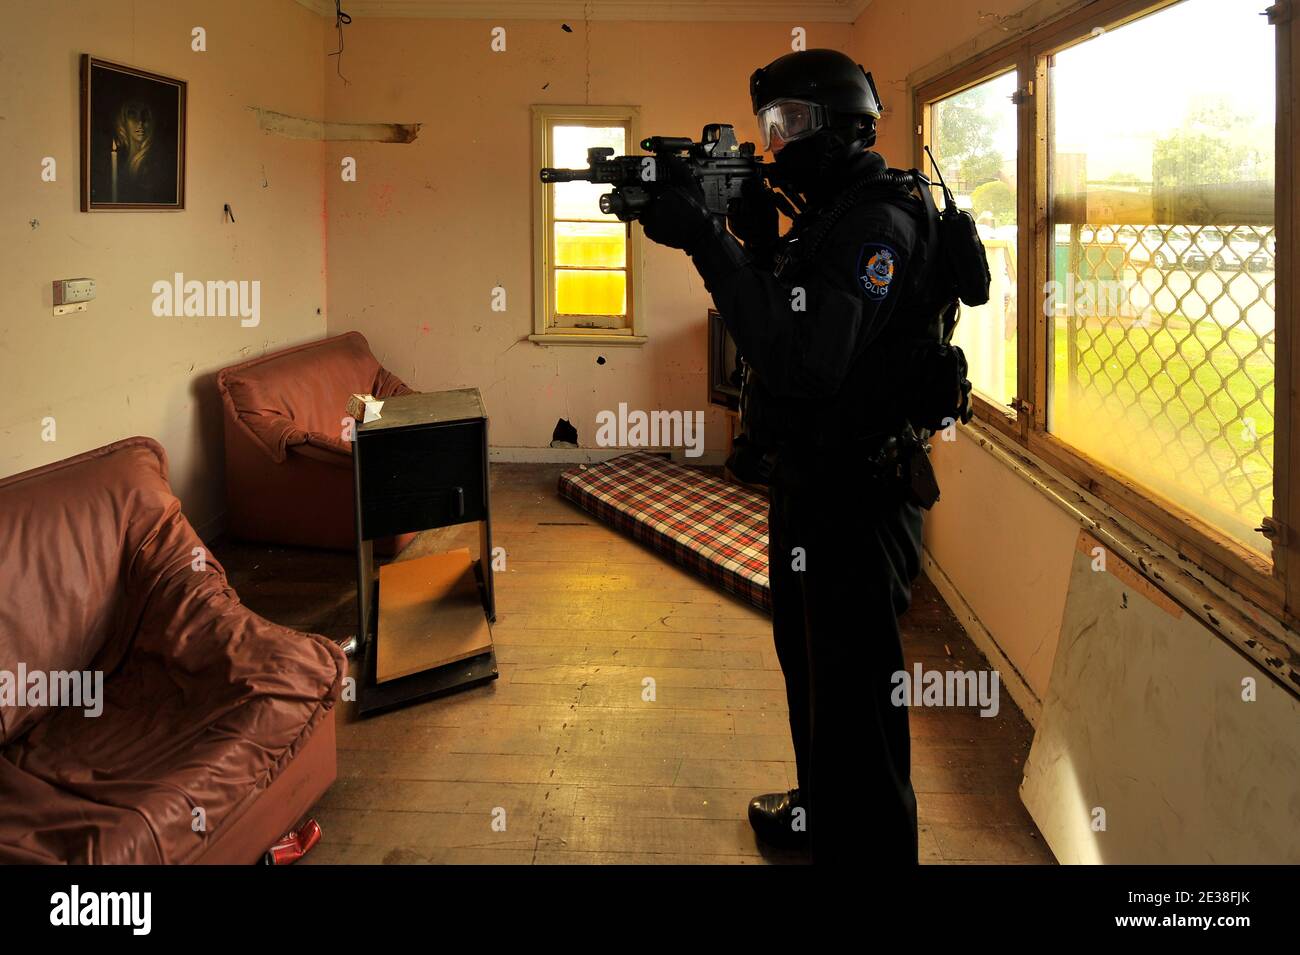 Police Tactical Response officers with laser sighted automatic weapons in action inside a house. Stock Photo